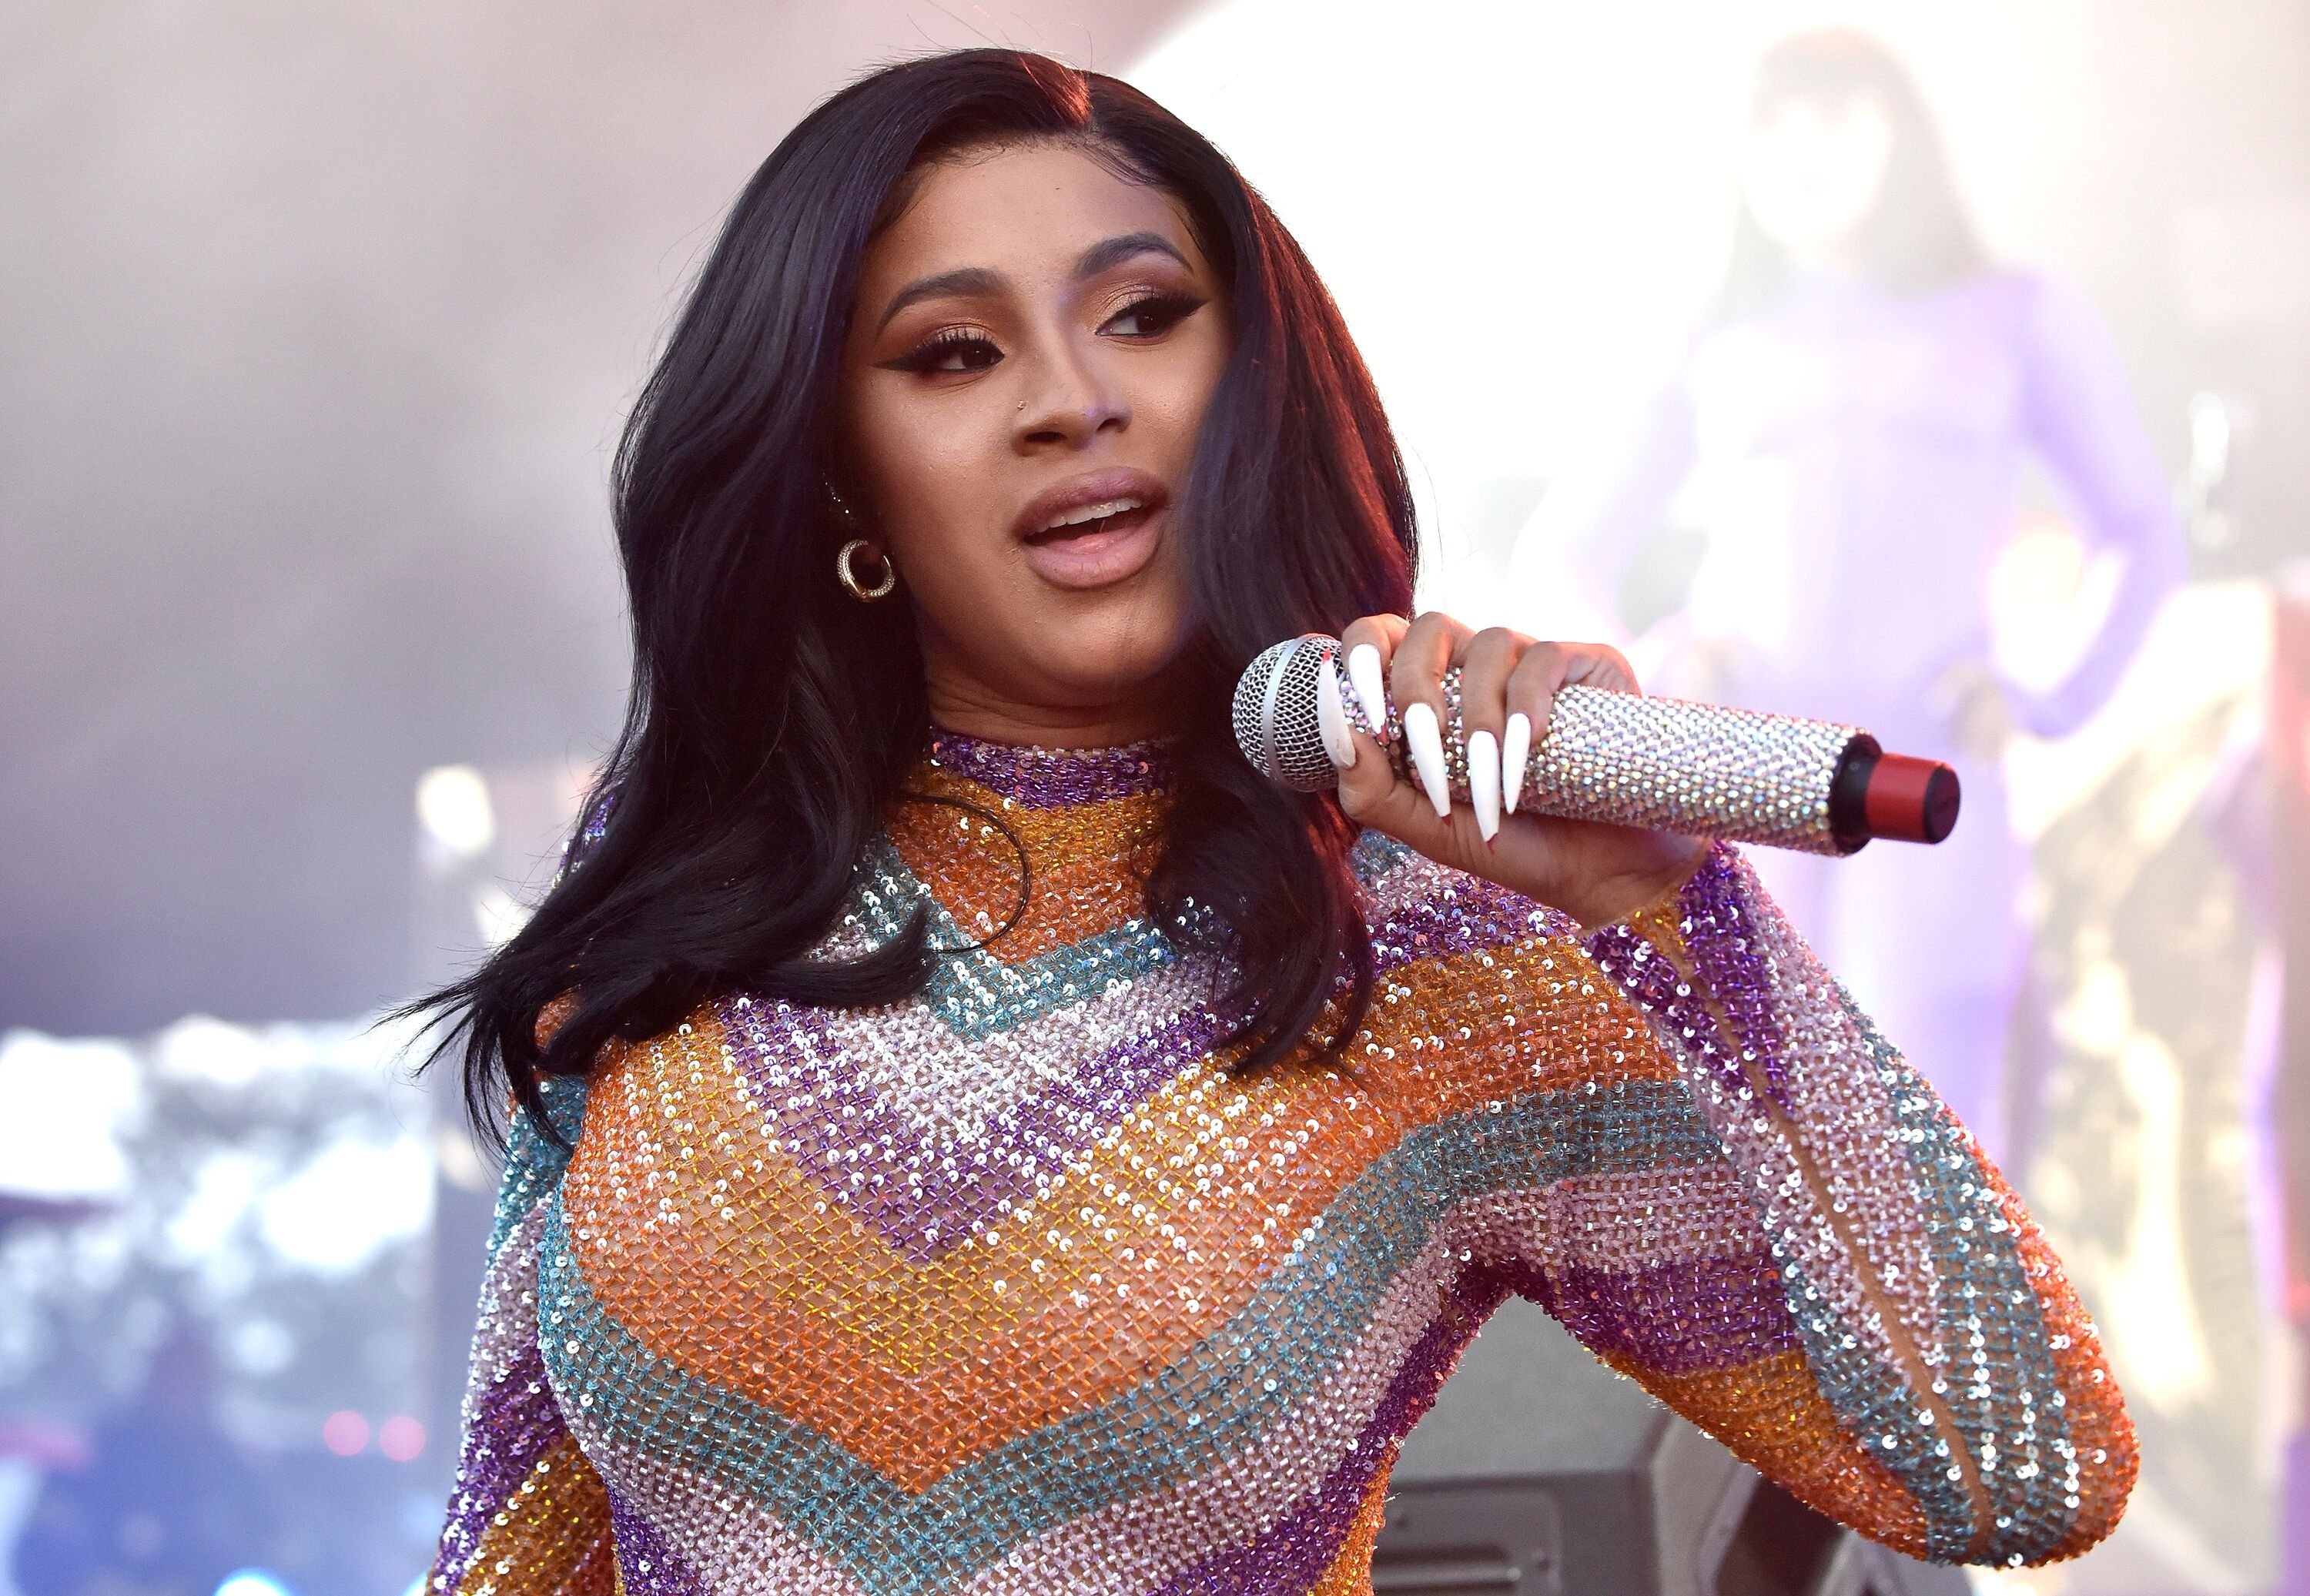 Cardi B performing onstage in a colorful ensemble | Source: Getty Images/GlobalImagesUkraine